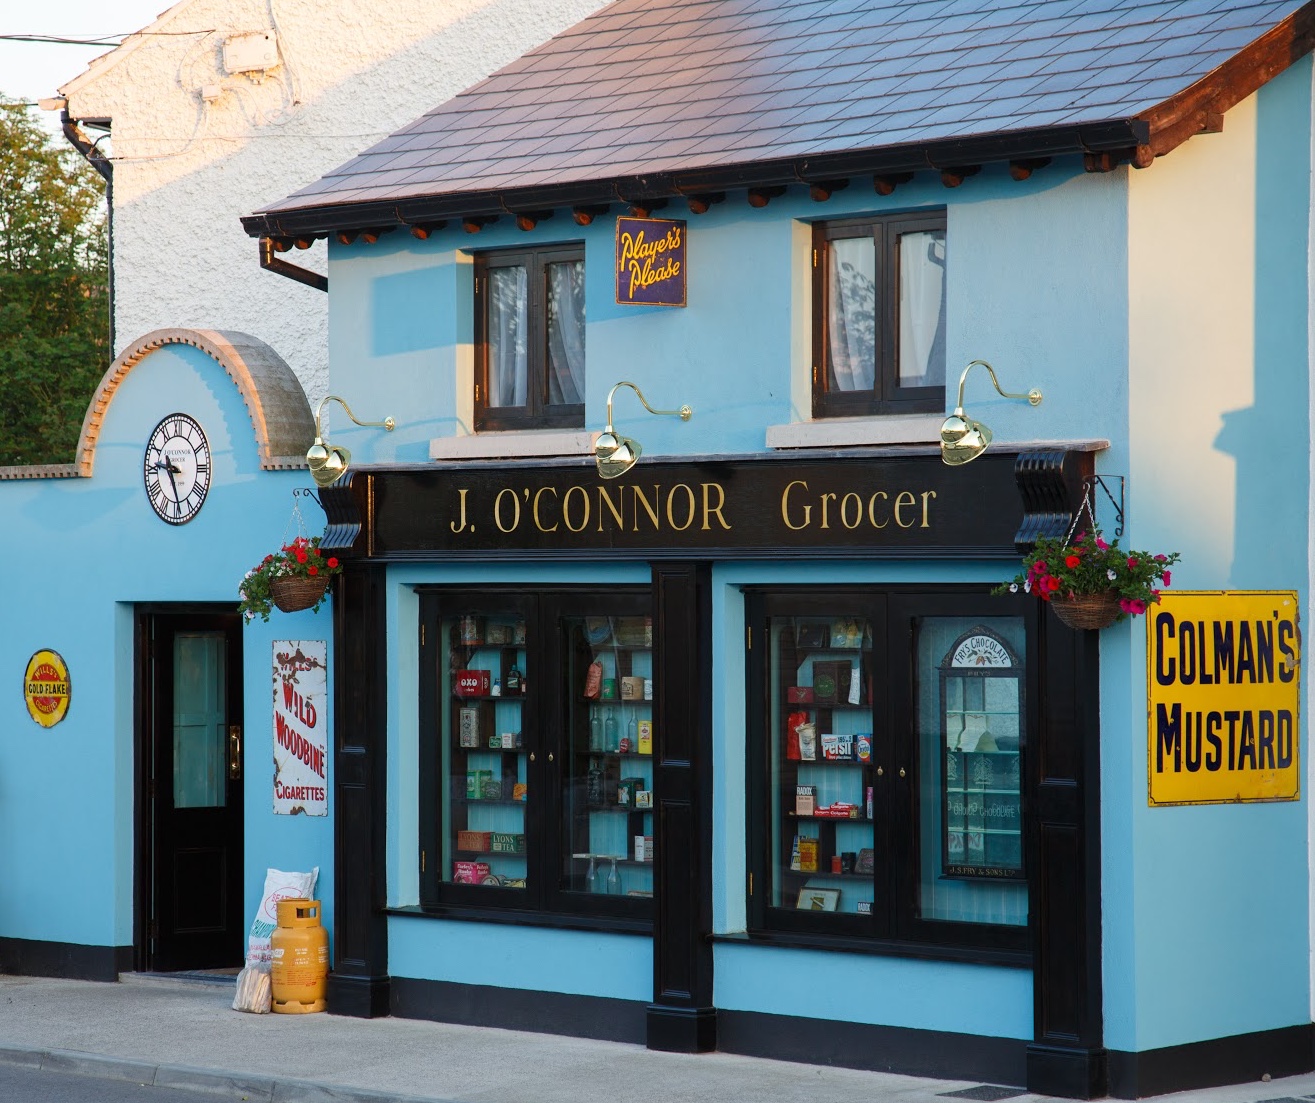 J O' Connor Grocer